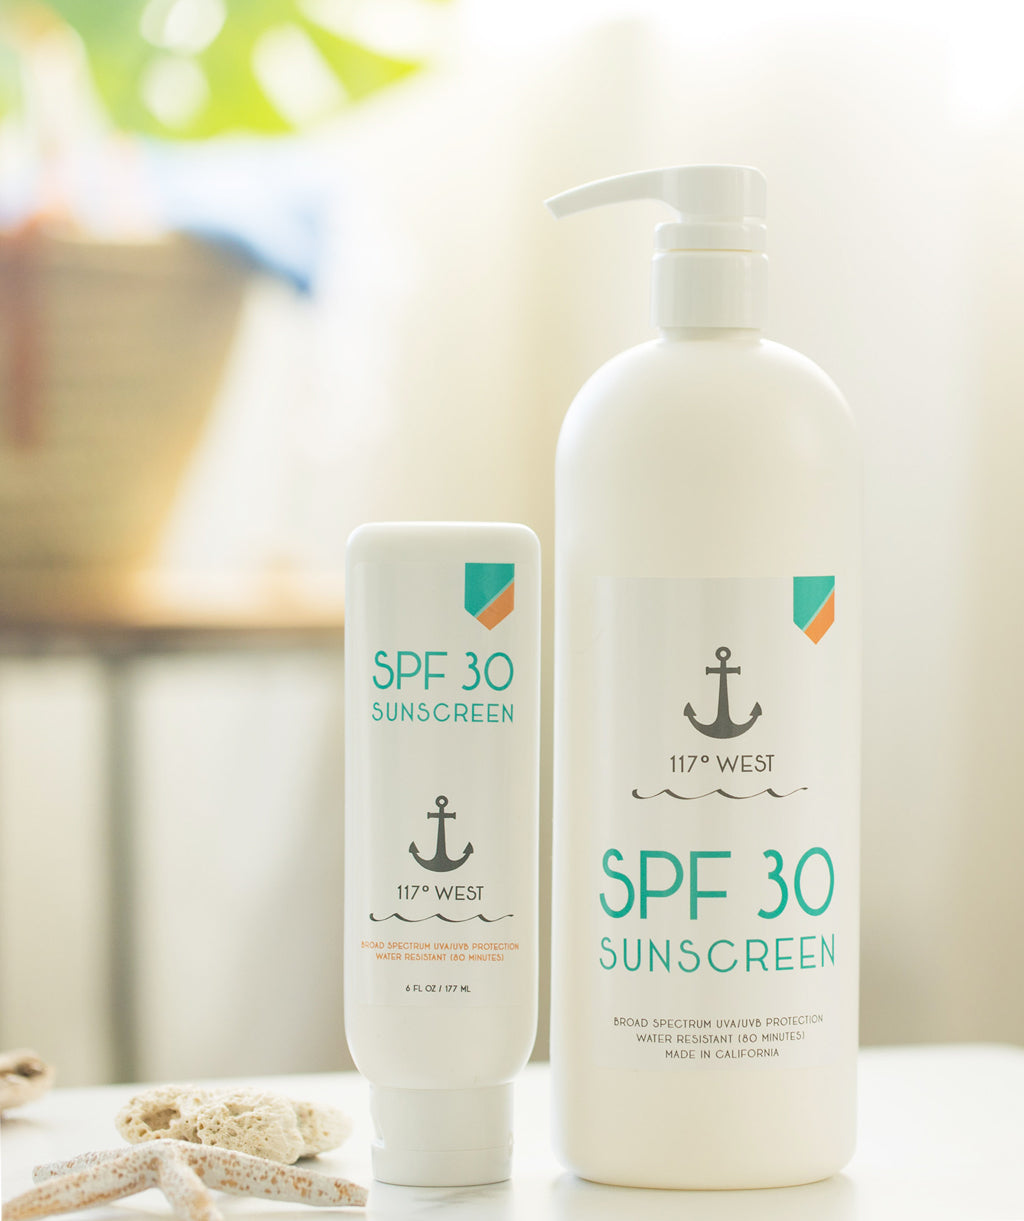 6 oz SPF 30 sunscreen and 32 oz SPF 30 sunscreen on top of a white table